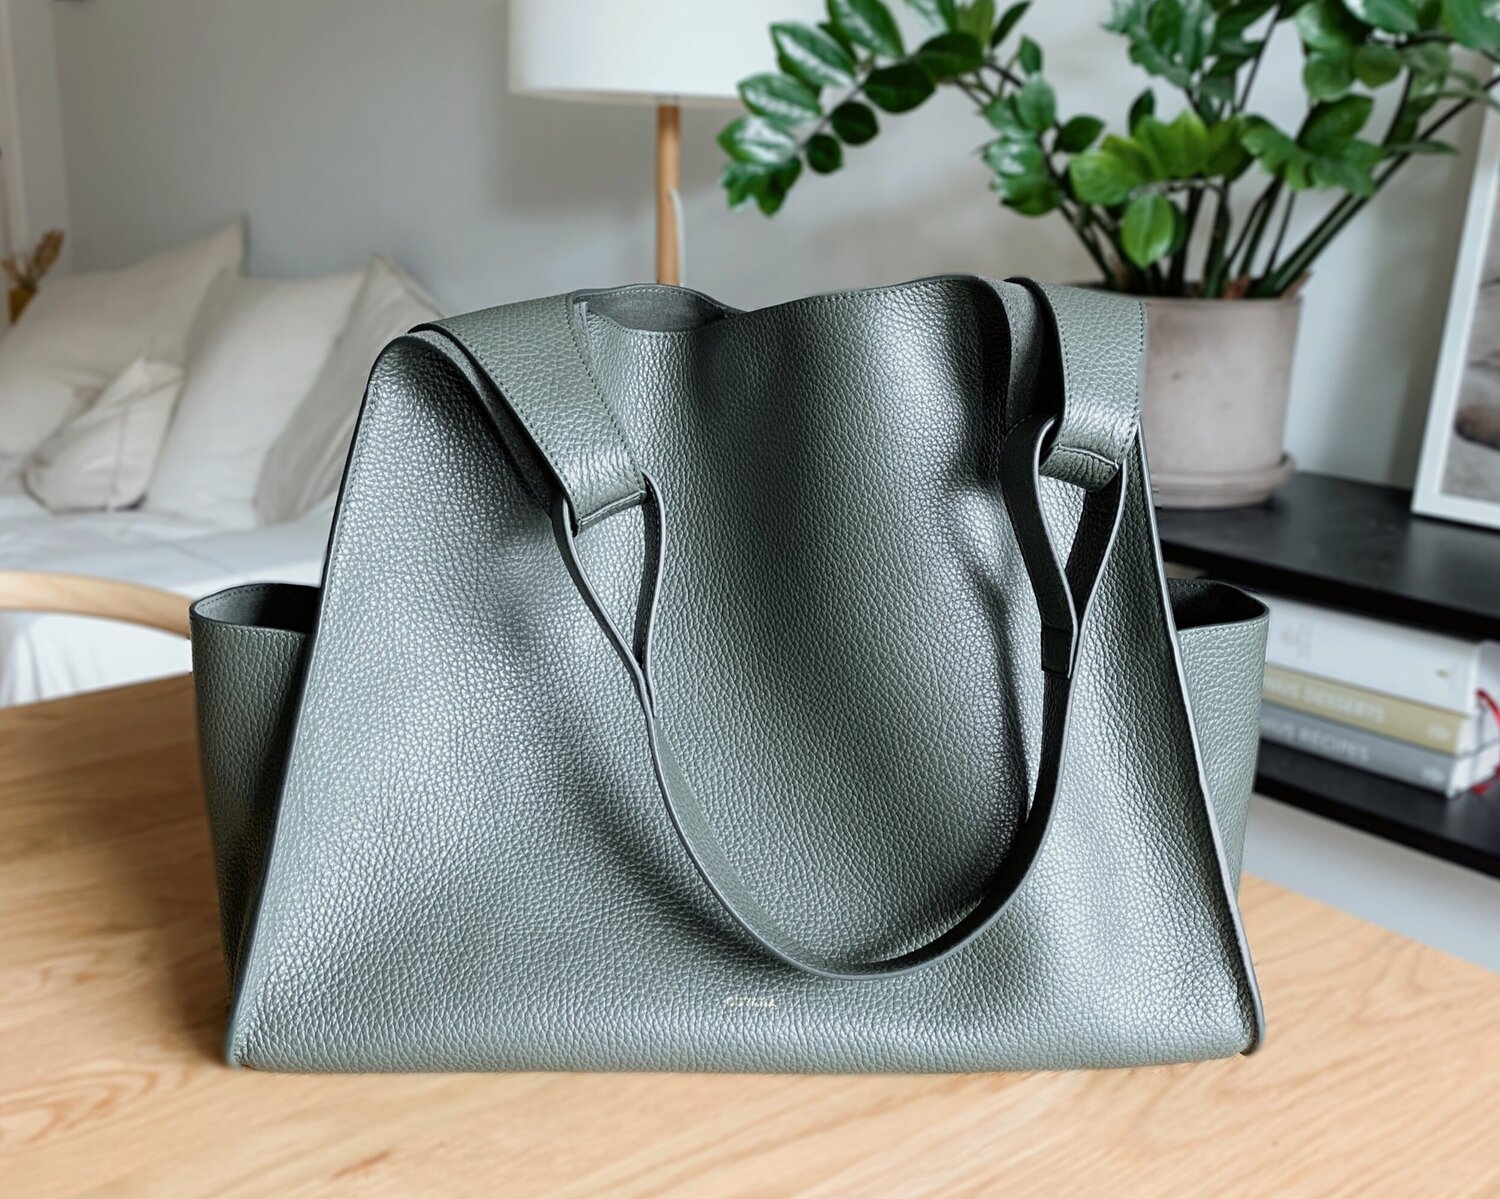 Gina Stovall -Cuyana Oversized Double Loop Bag Review